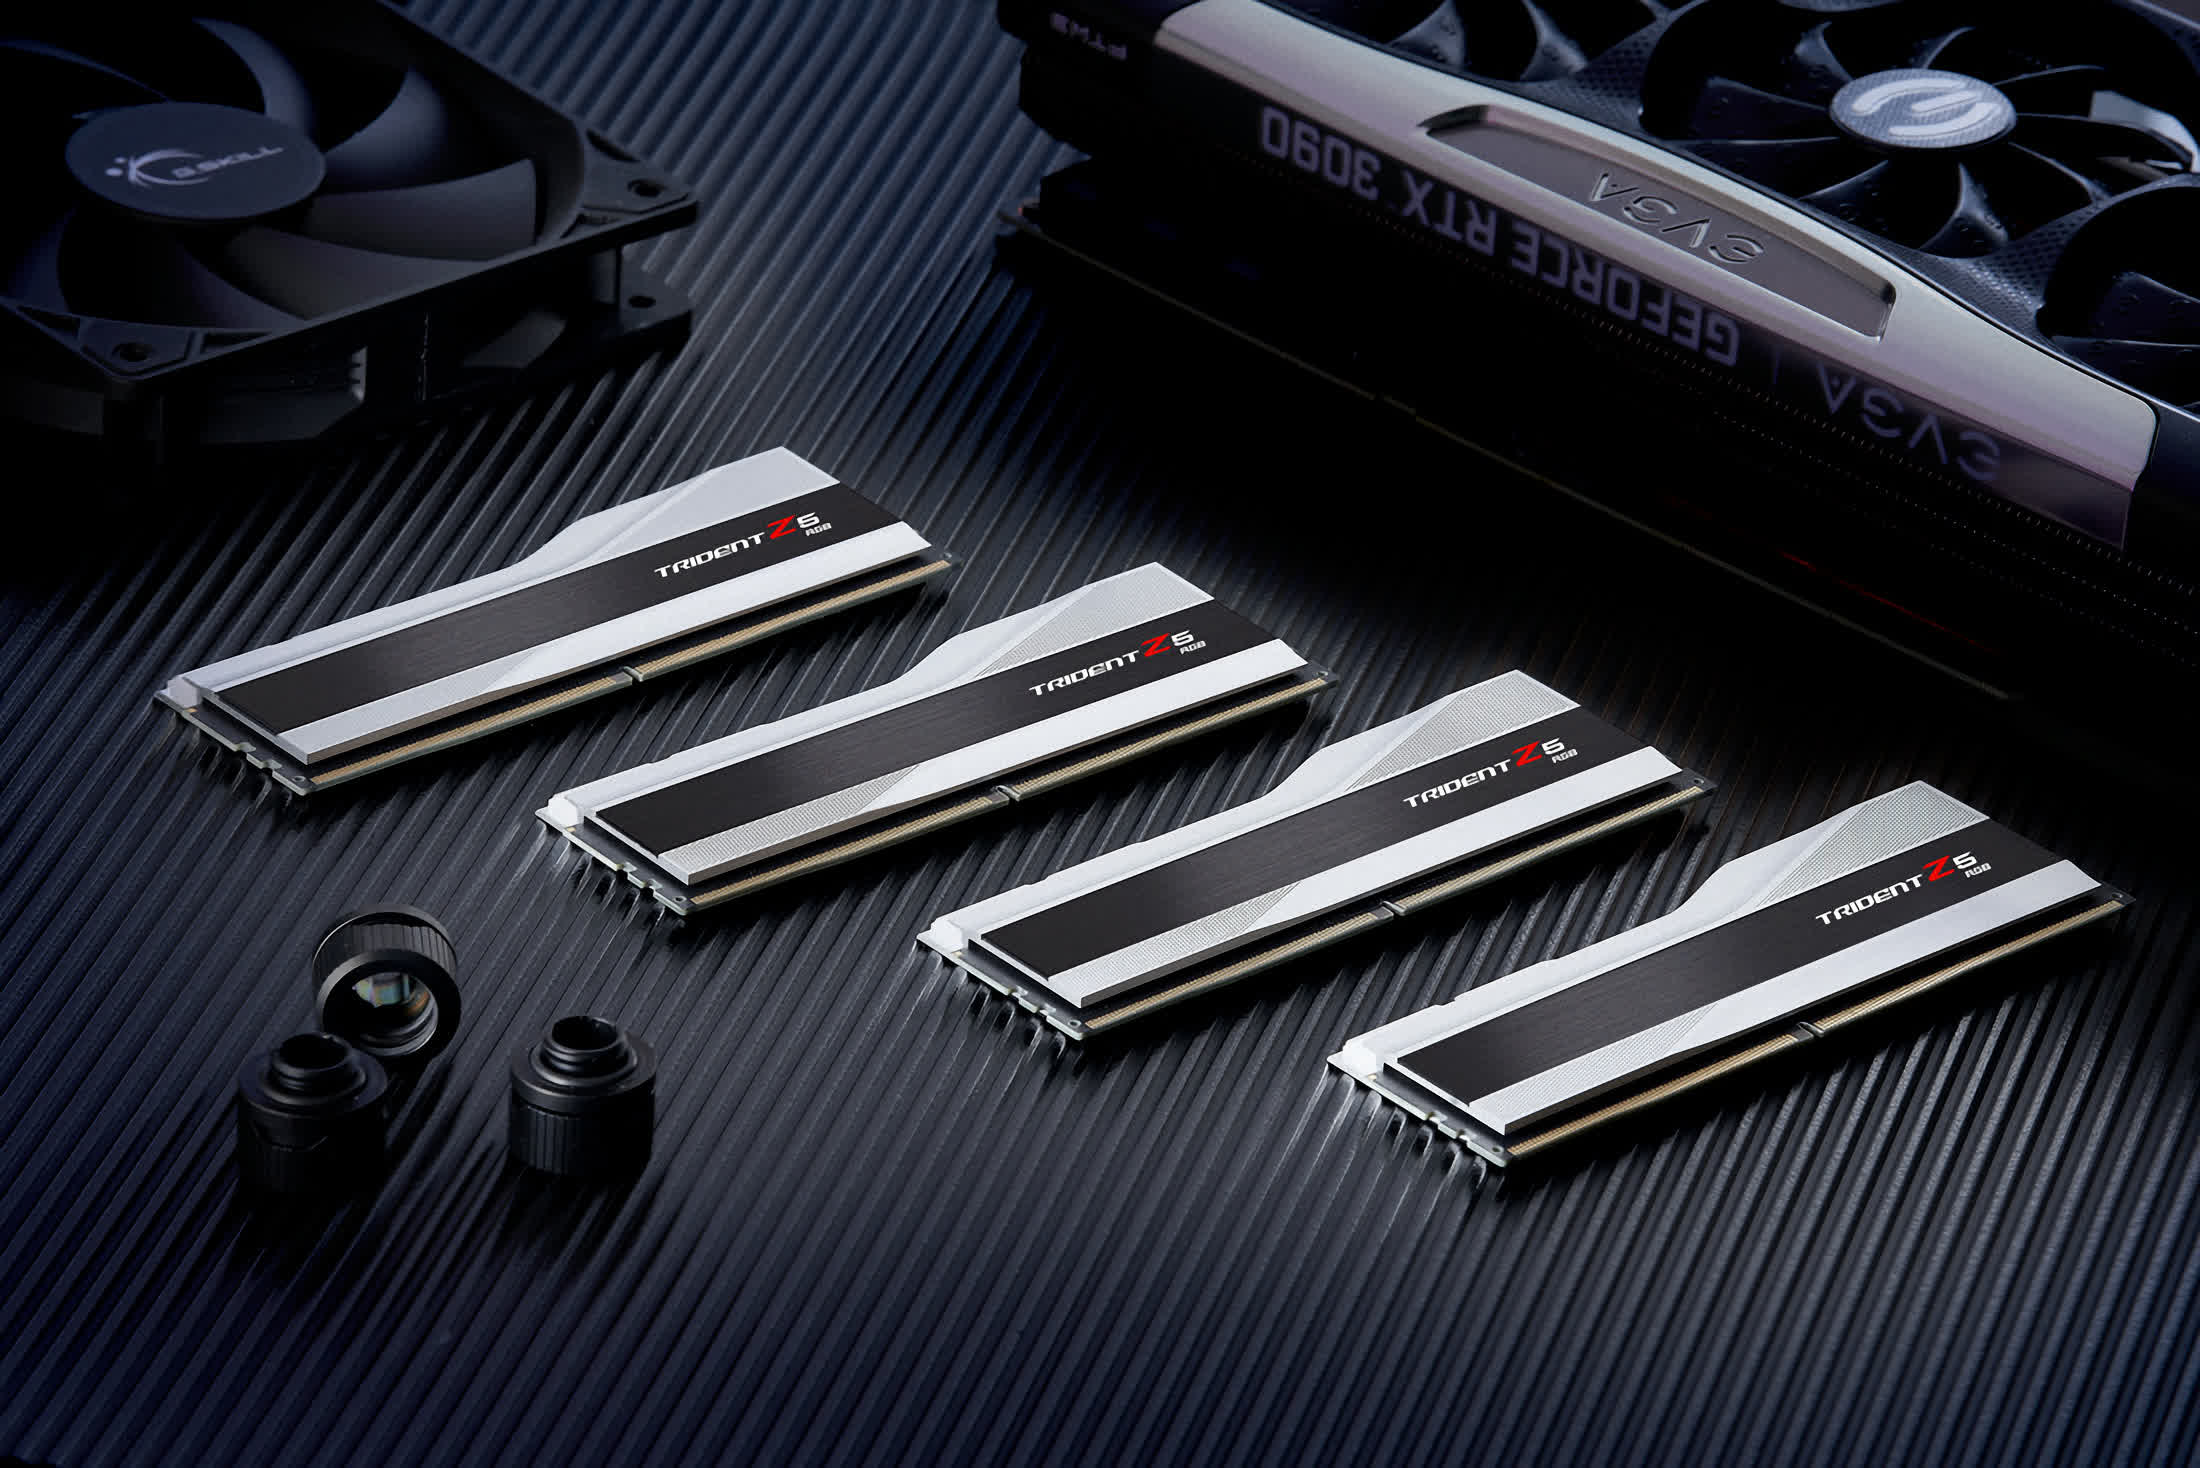 G.Skill launches Trident Z5 DDR5-6400 CL36 kits with Samsung-made memory chips